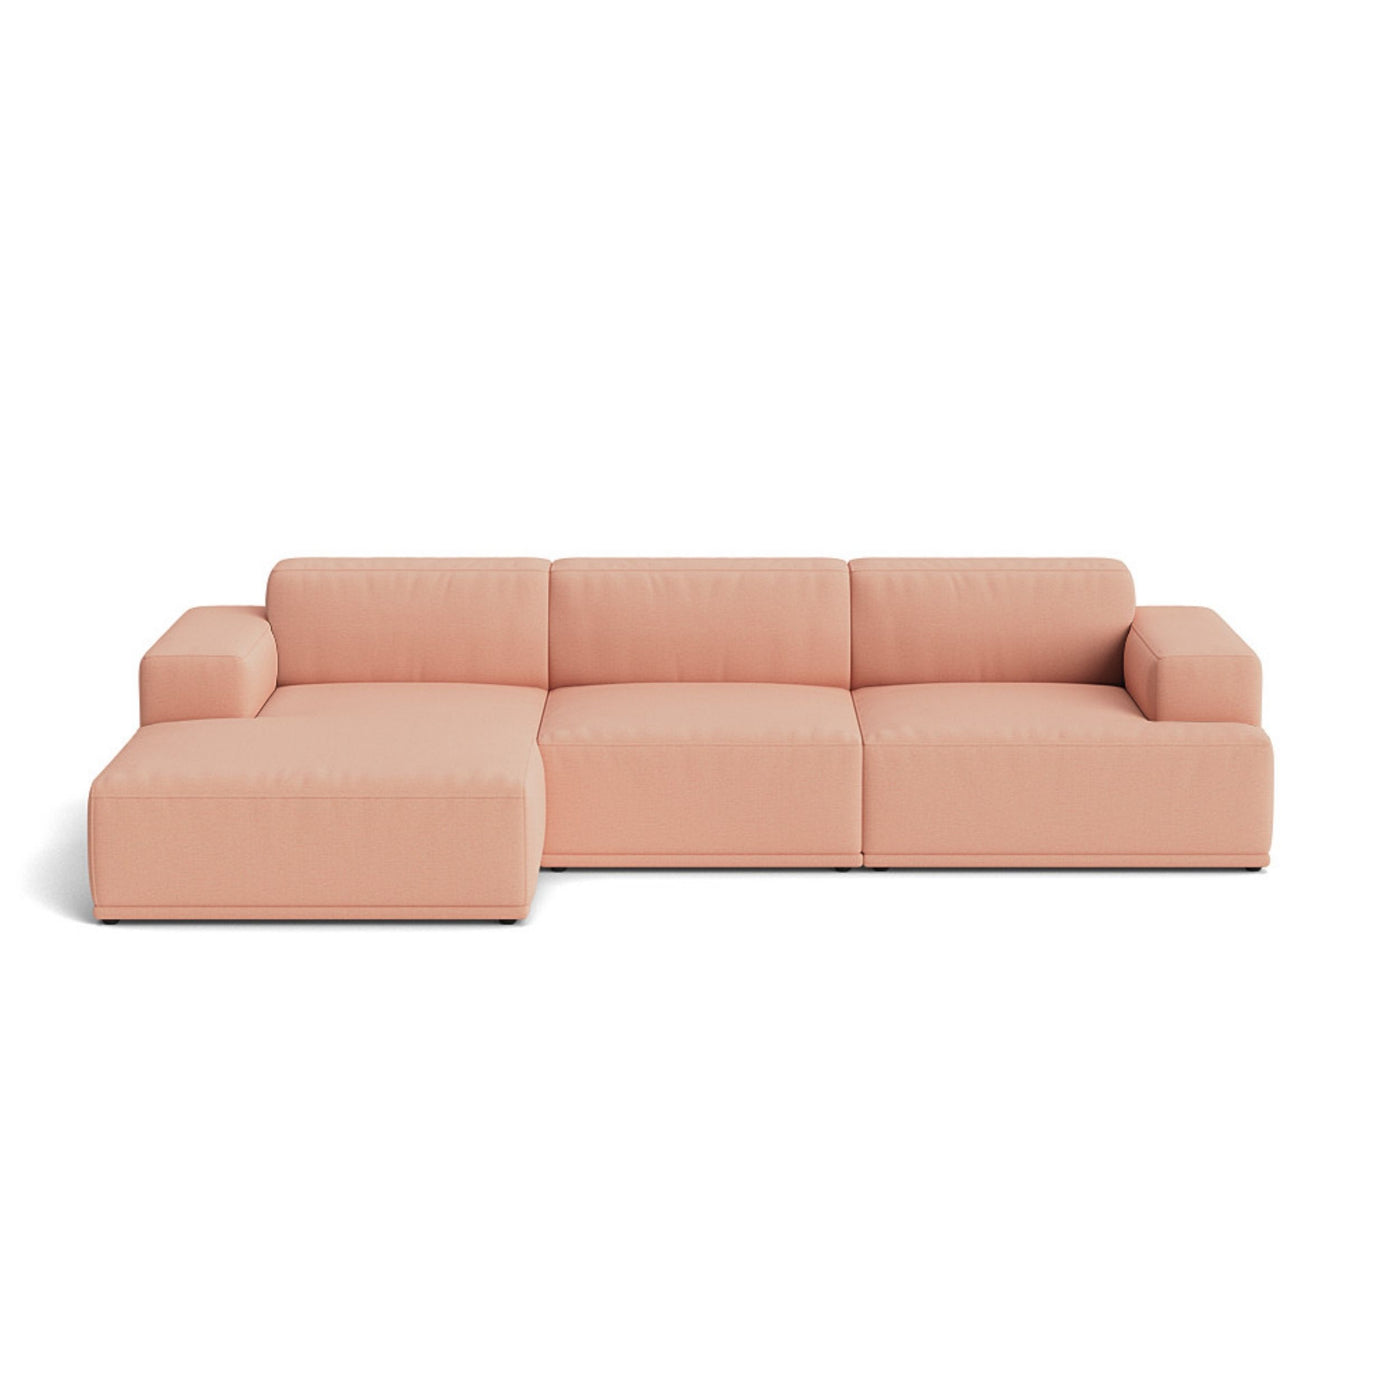 Muuto Connect Soft Modular 3 Seater Sofa, configuration 3. Made-to-order from someday designs. #colour_steelcut-trio-515